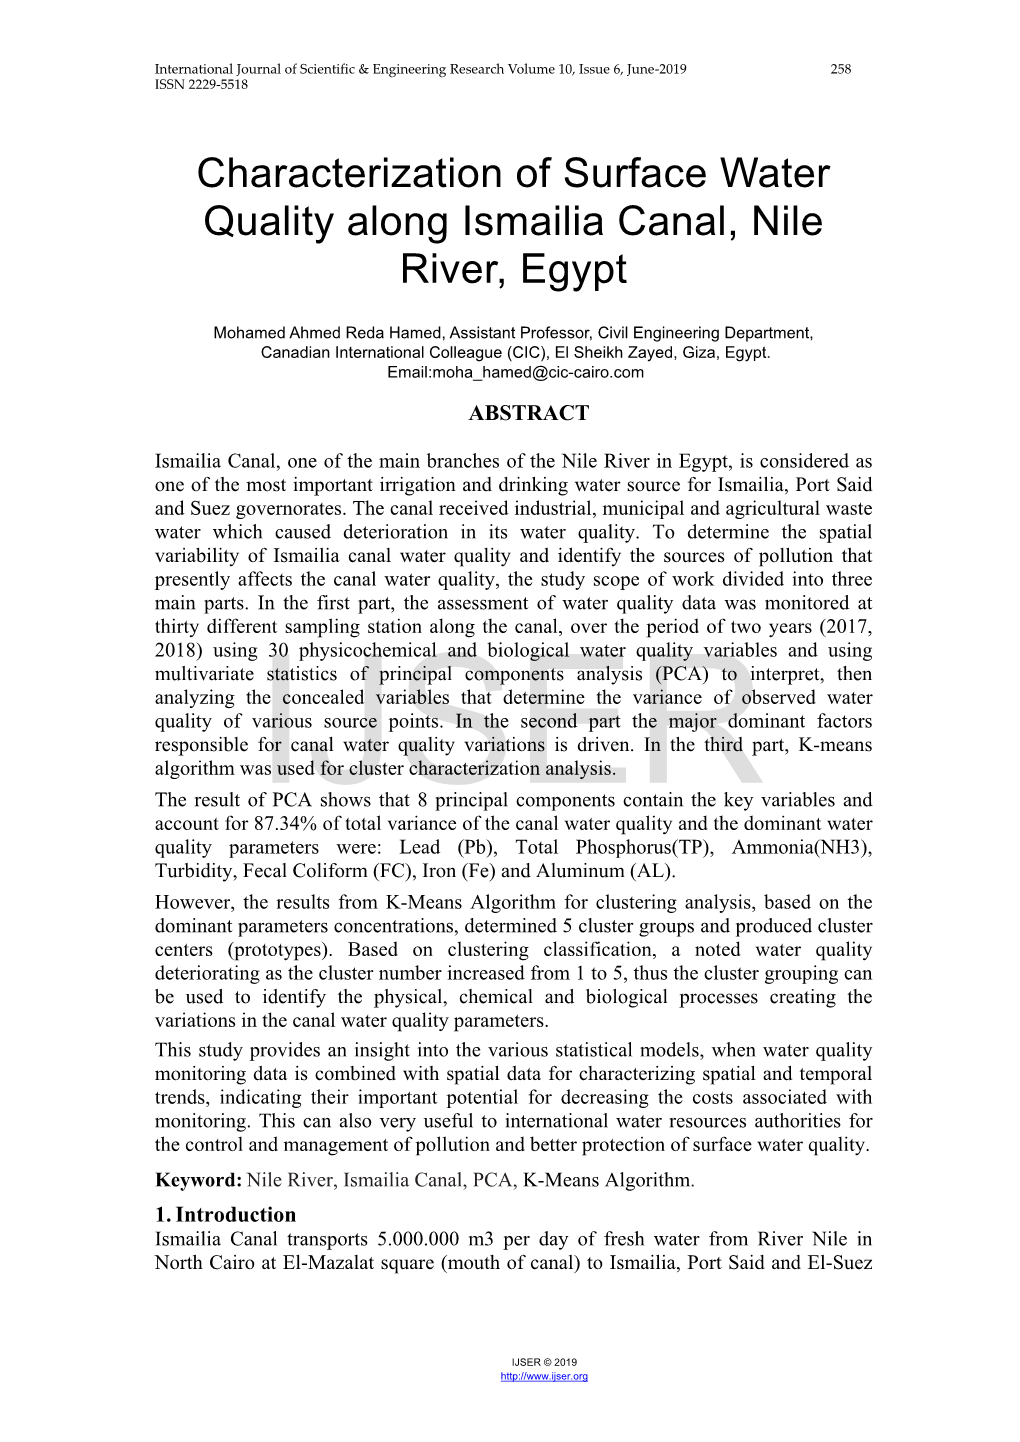 Characterization of Surface Water Quality Along Ismailia Canal, Nile River, Egypt